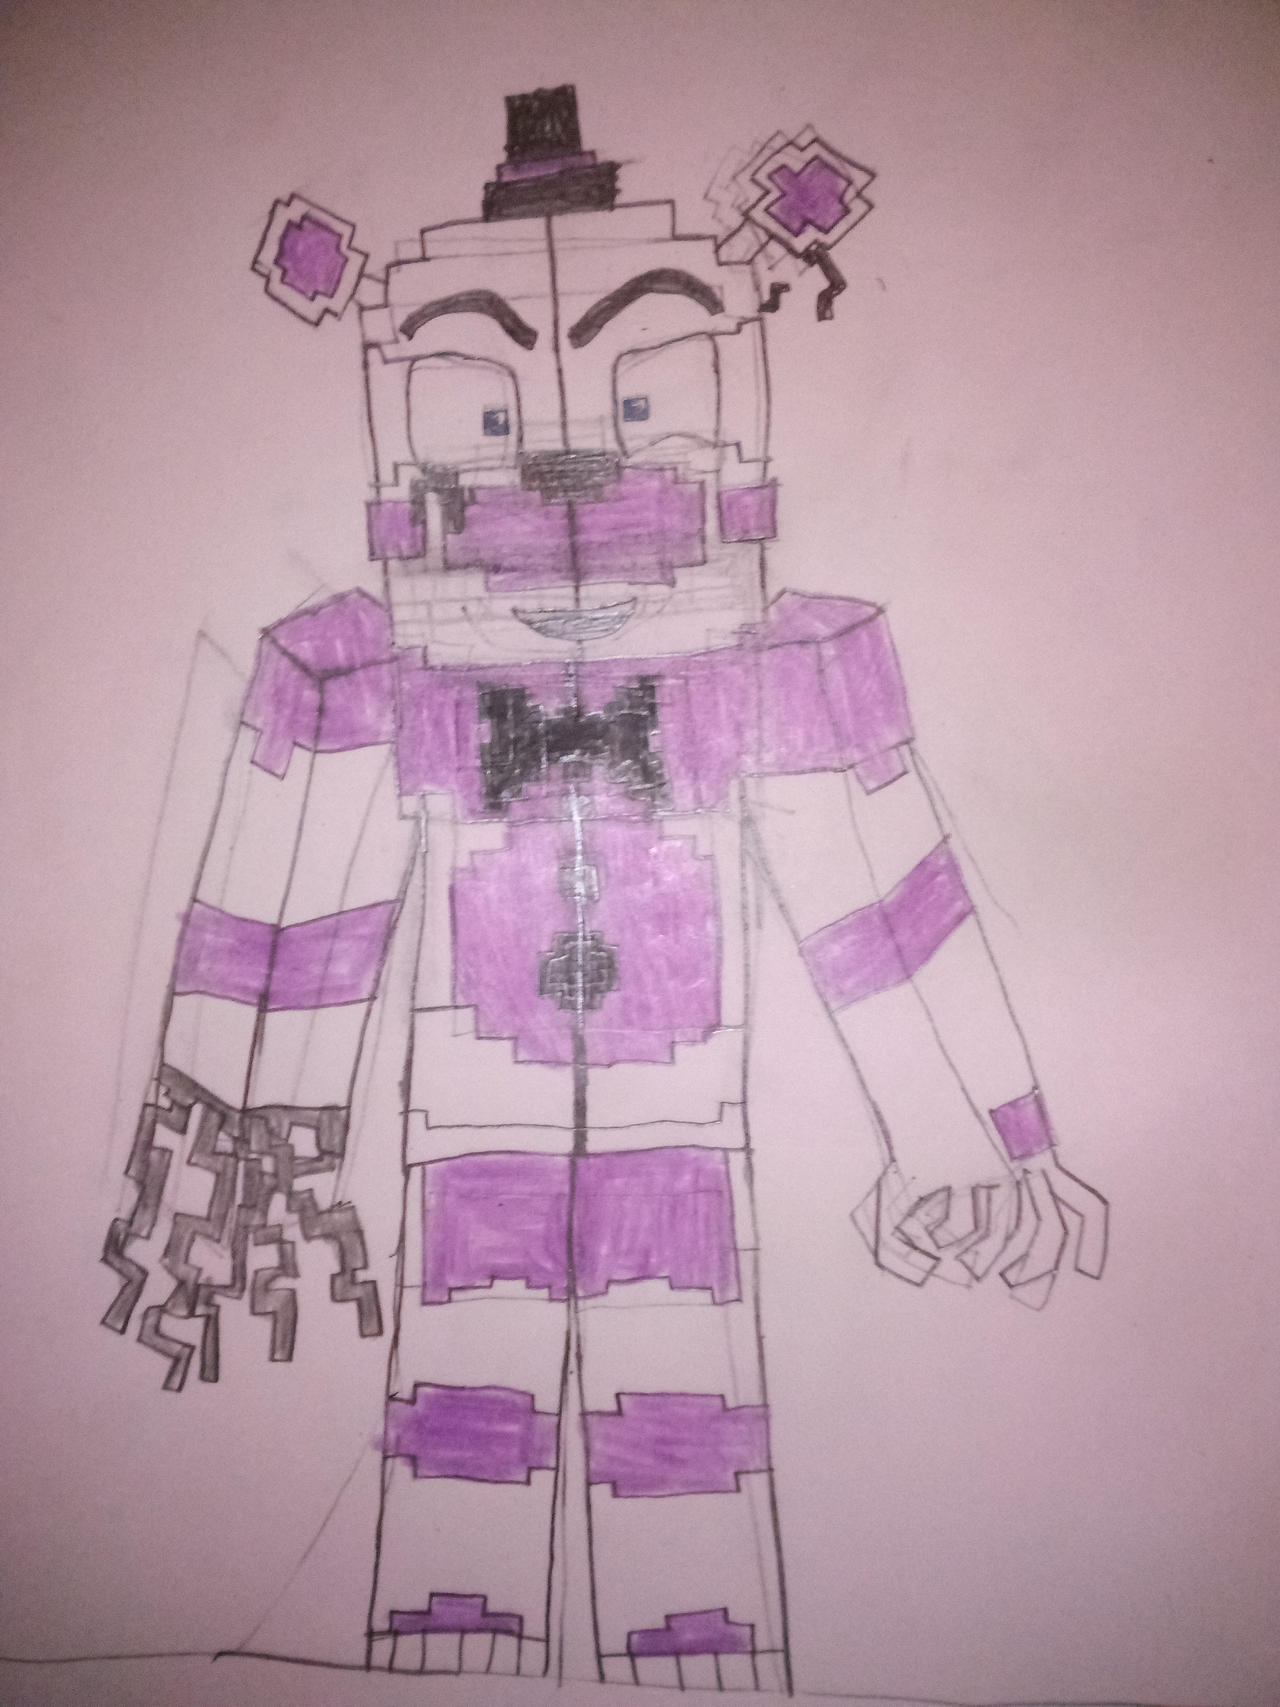 Dress Up Like Glitchtrap from Five Nights at Freddie's - Elemental